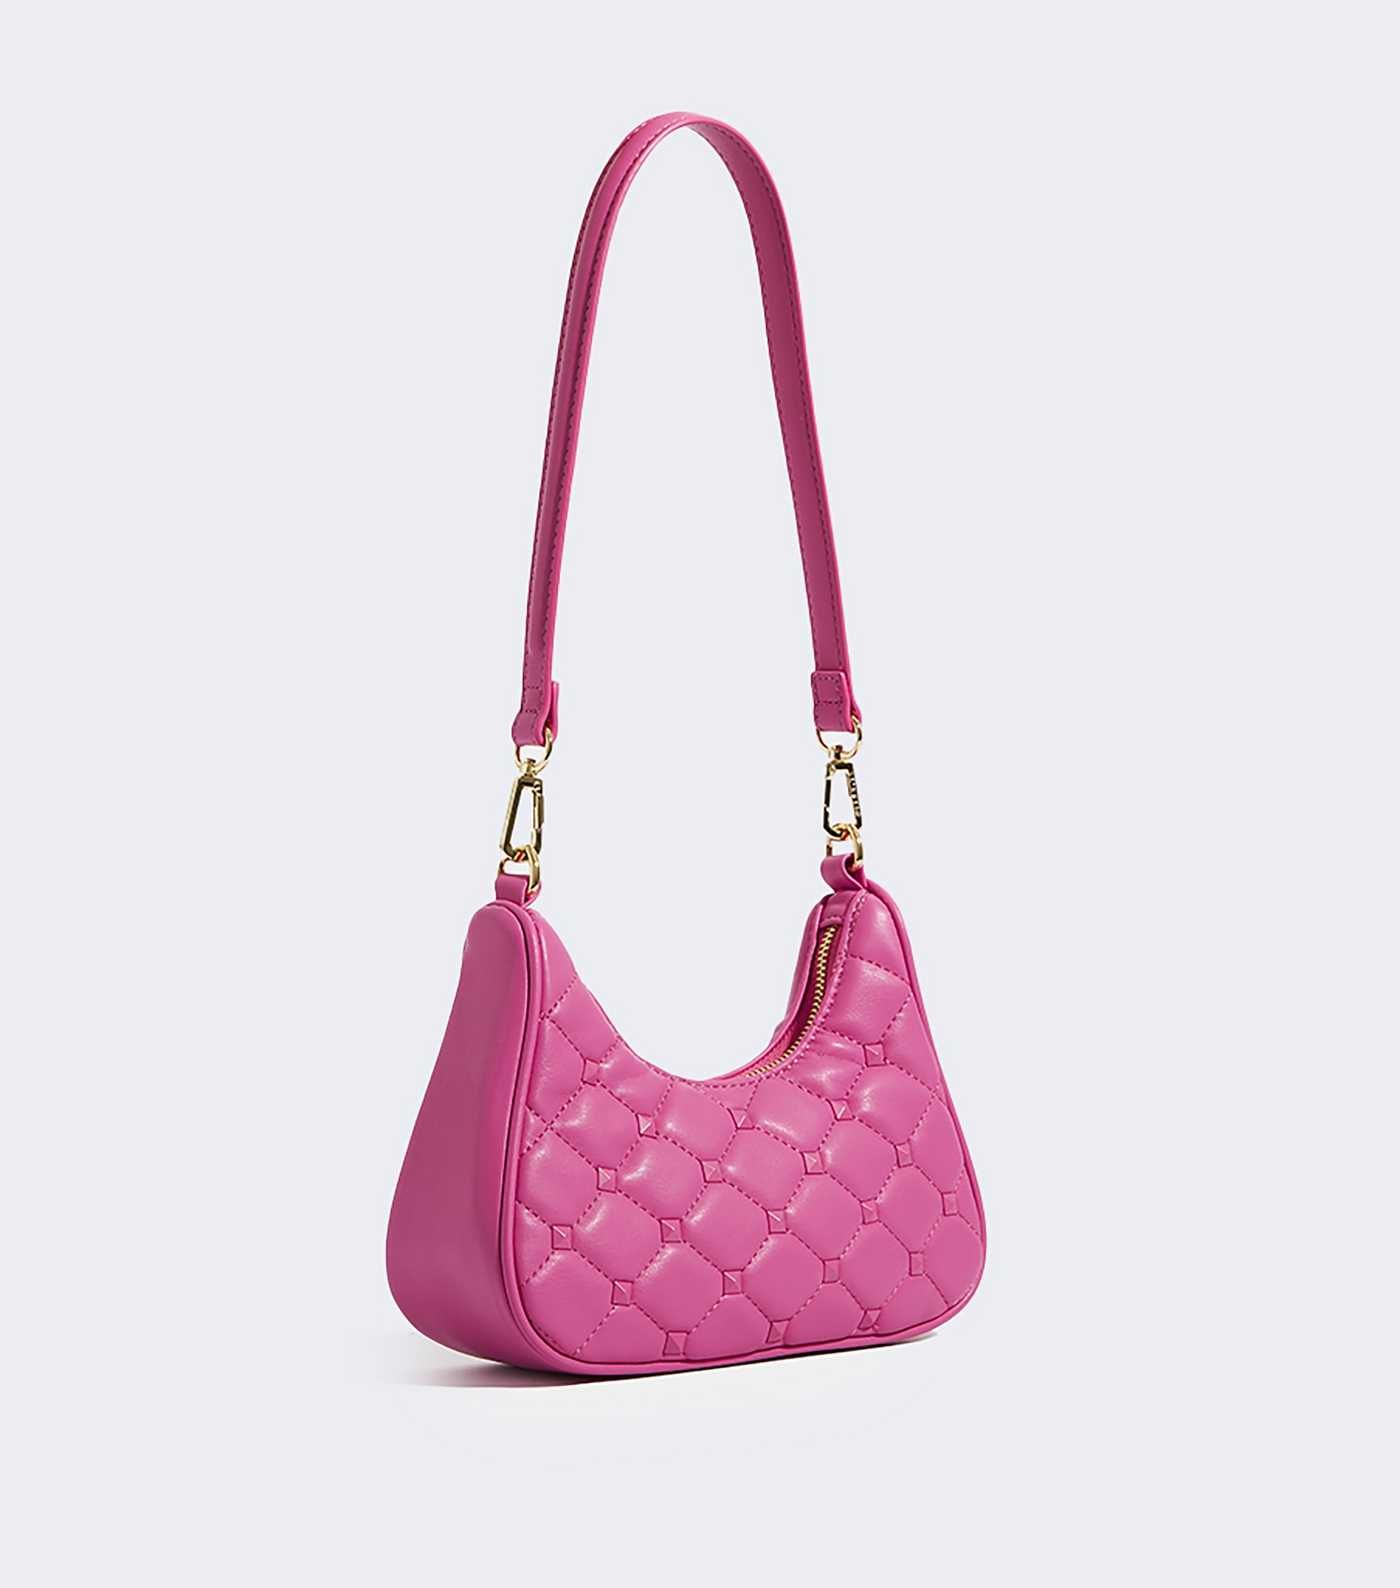 Skinnydip Pink Leather-Look Quilted Cross Body Bag
						
						Add to Saved Items
						Remove f... | New Look (UK)